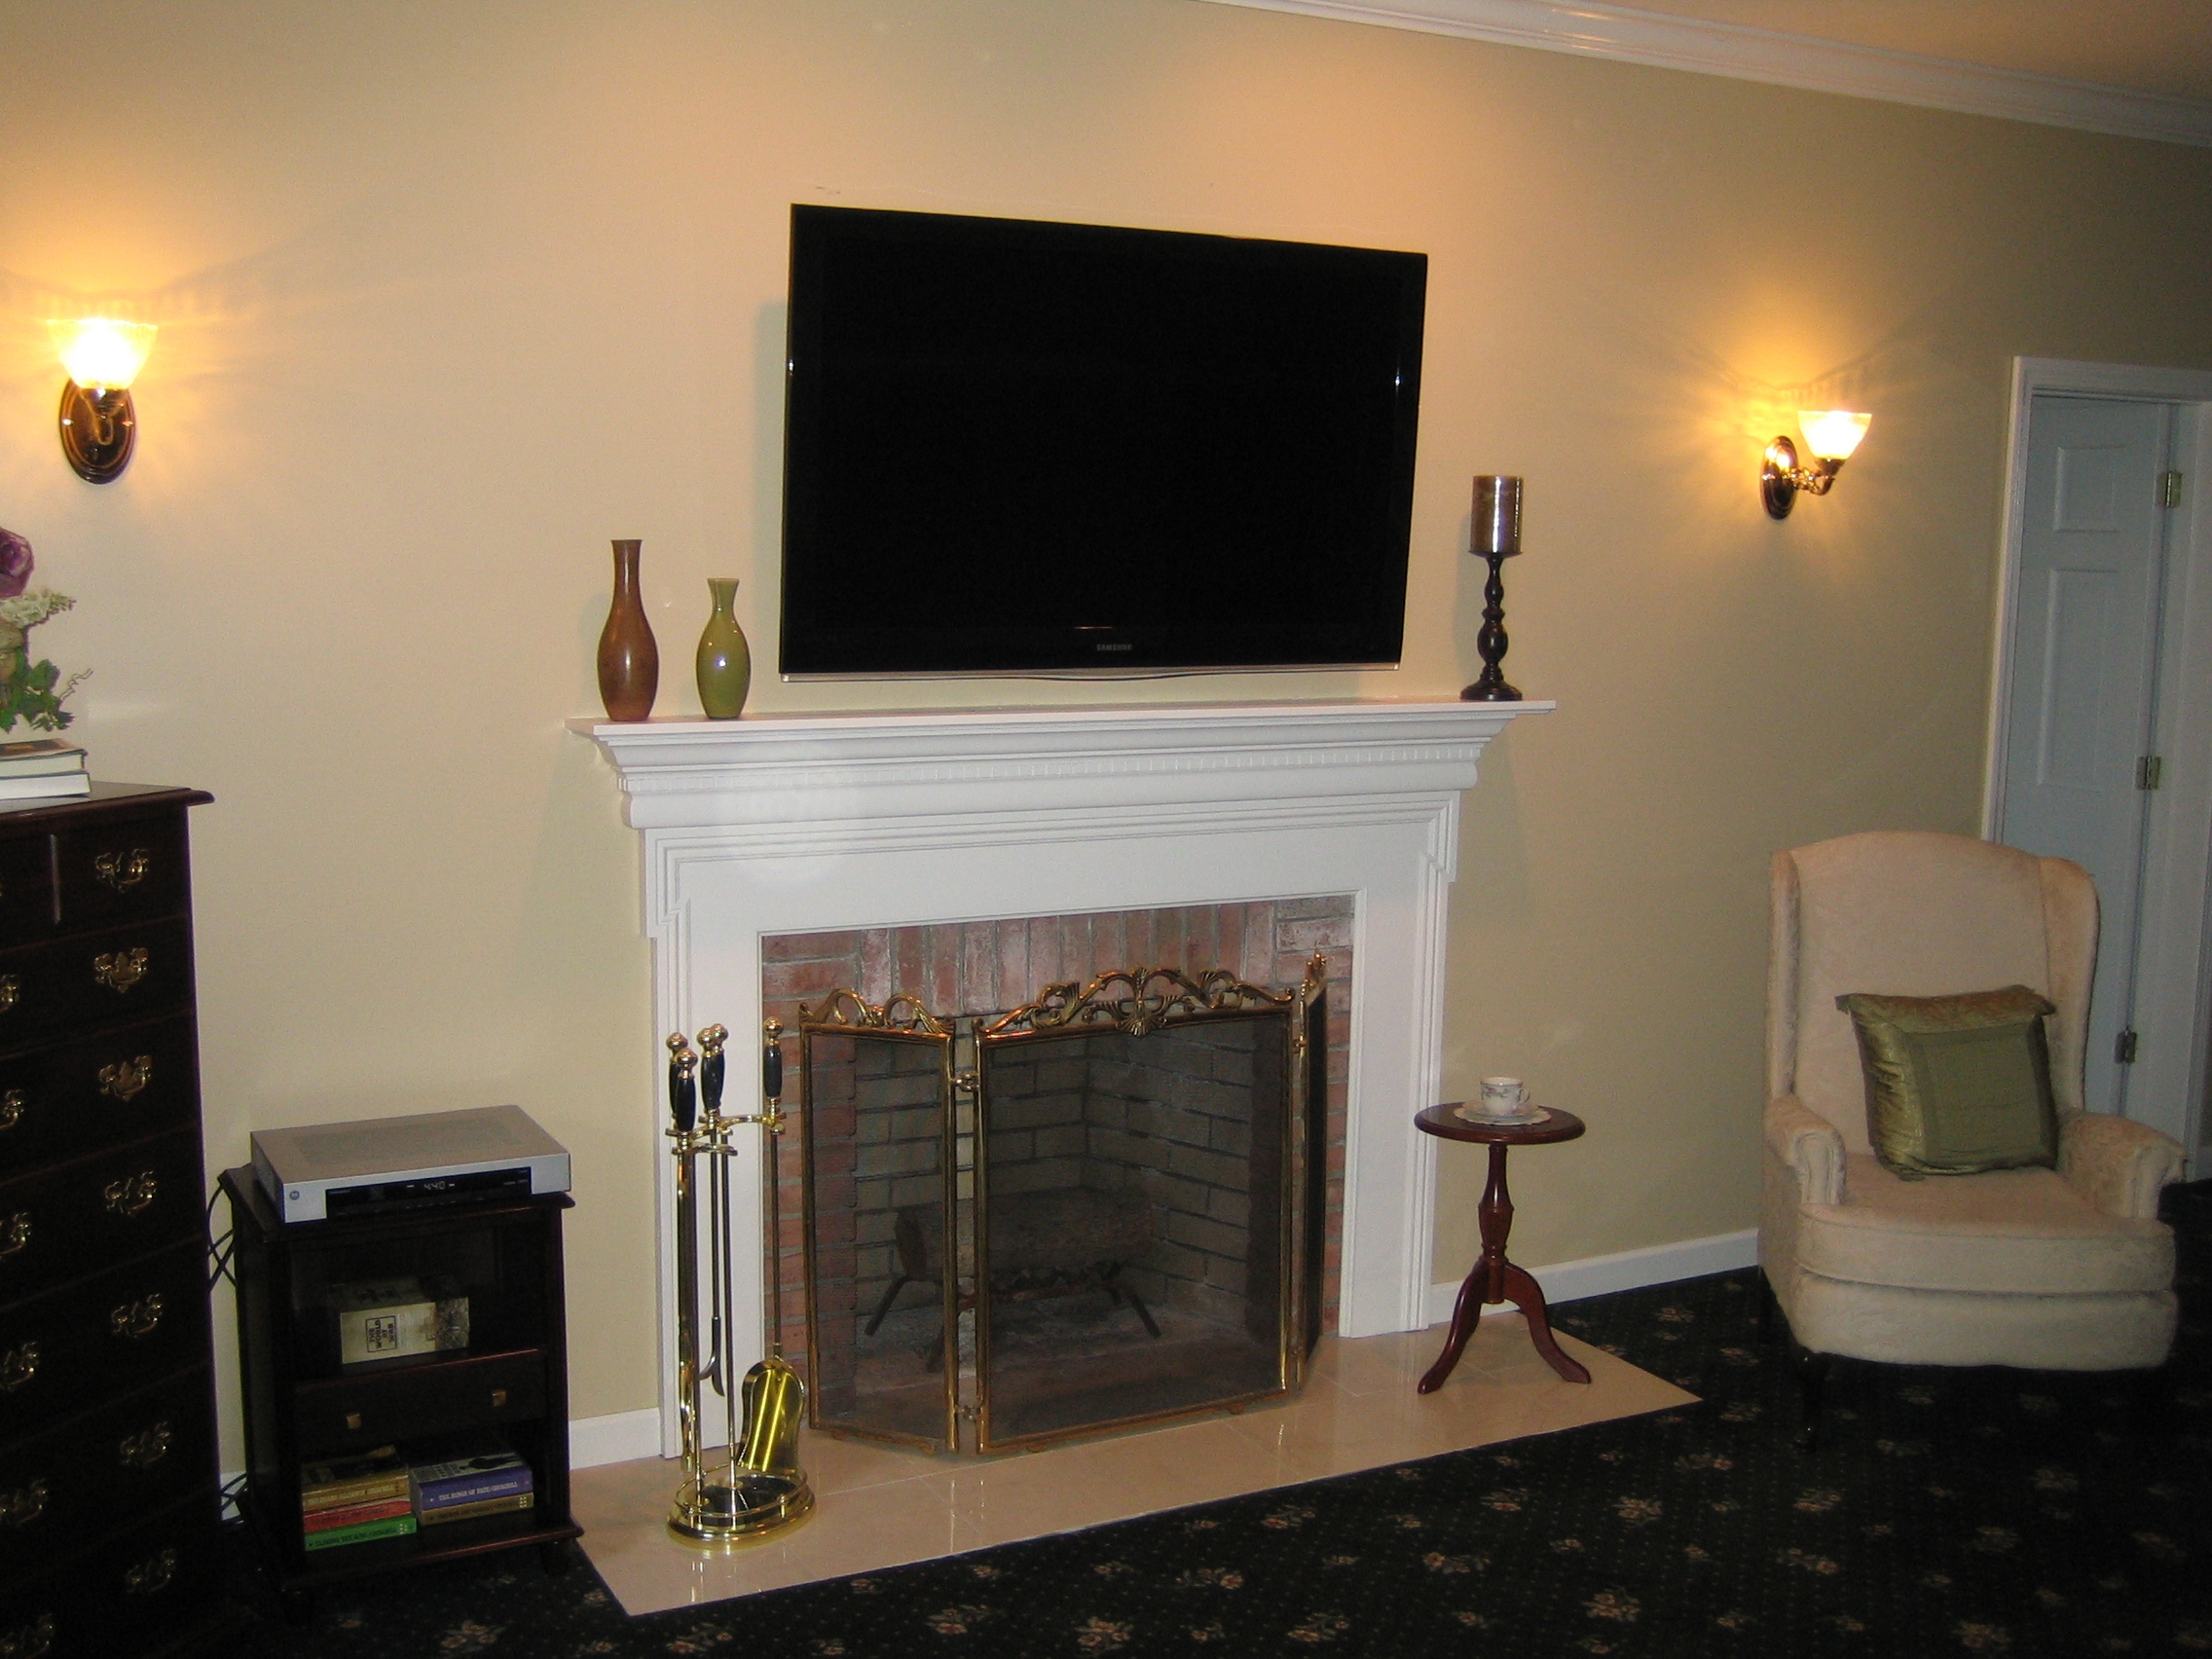 wall mount tv over fireplace ideas wall mount tv over fireplace ideas awesome clinton ct mount tv above fireplace home theater installation tv